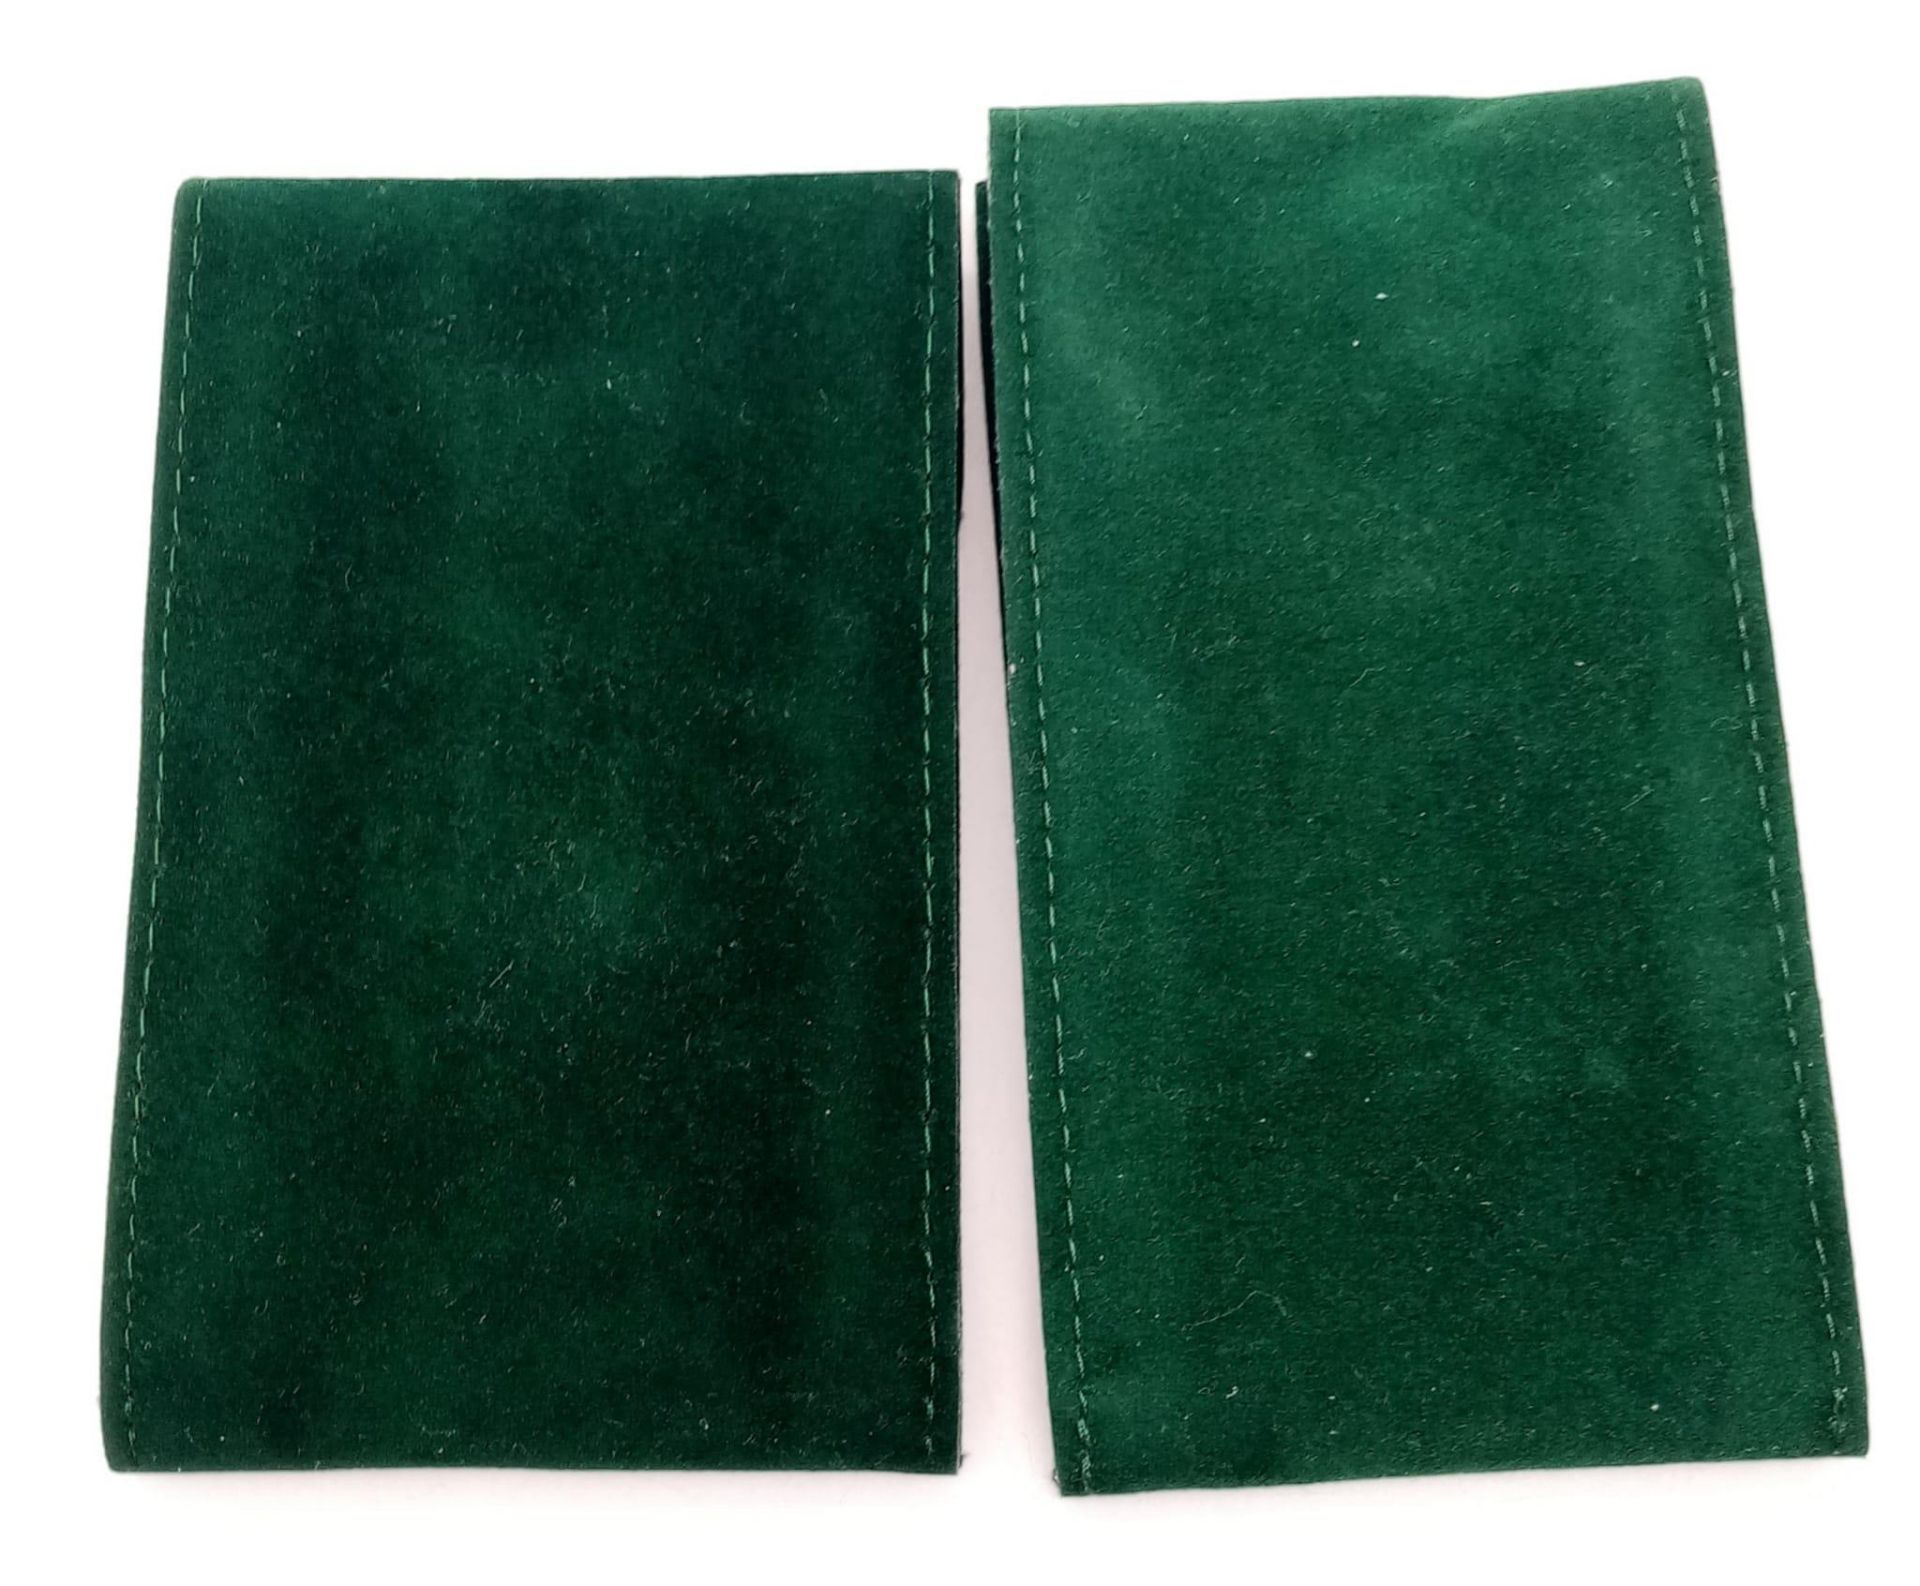 Two Different Sized Rolex Branded Travel Pouches. Soft green textile material. 12cm x 6cm and 11cm x - Bild 5 aus 9